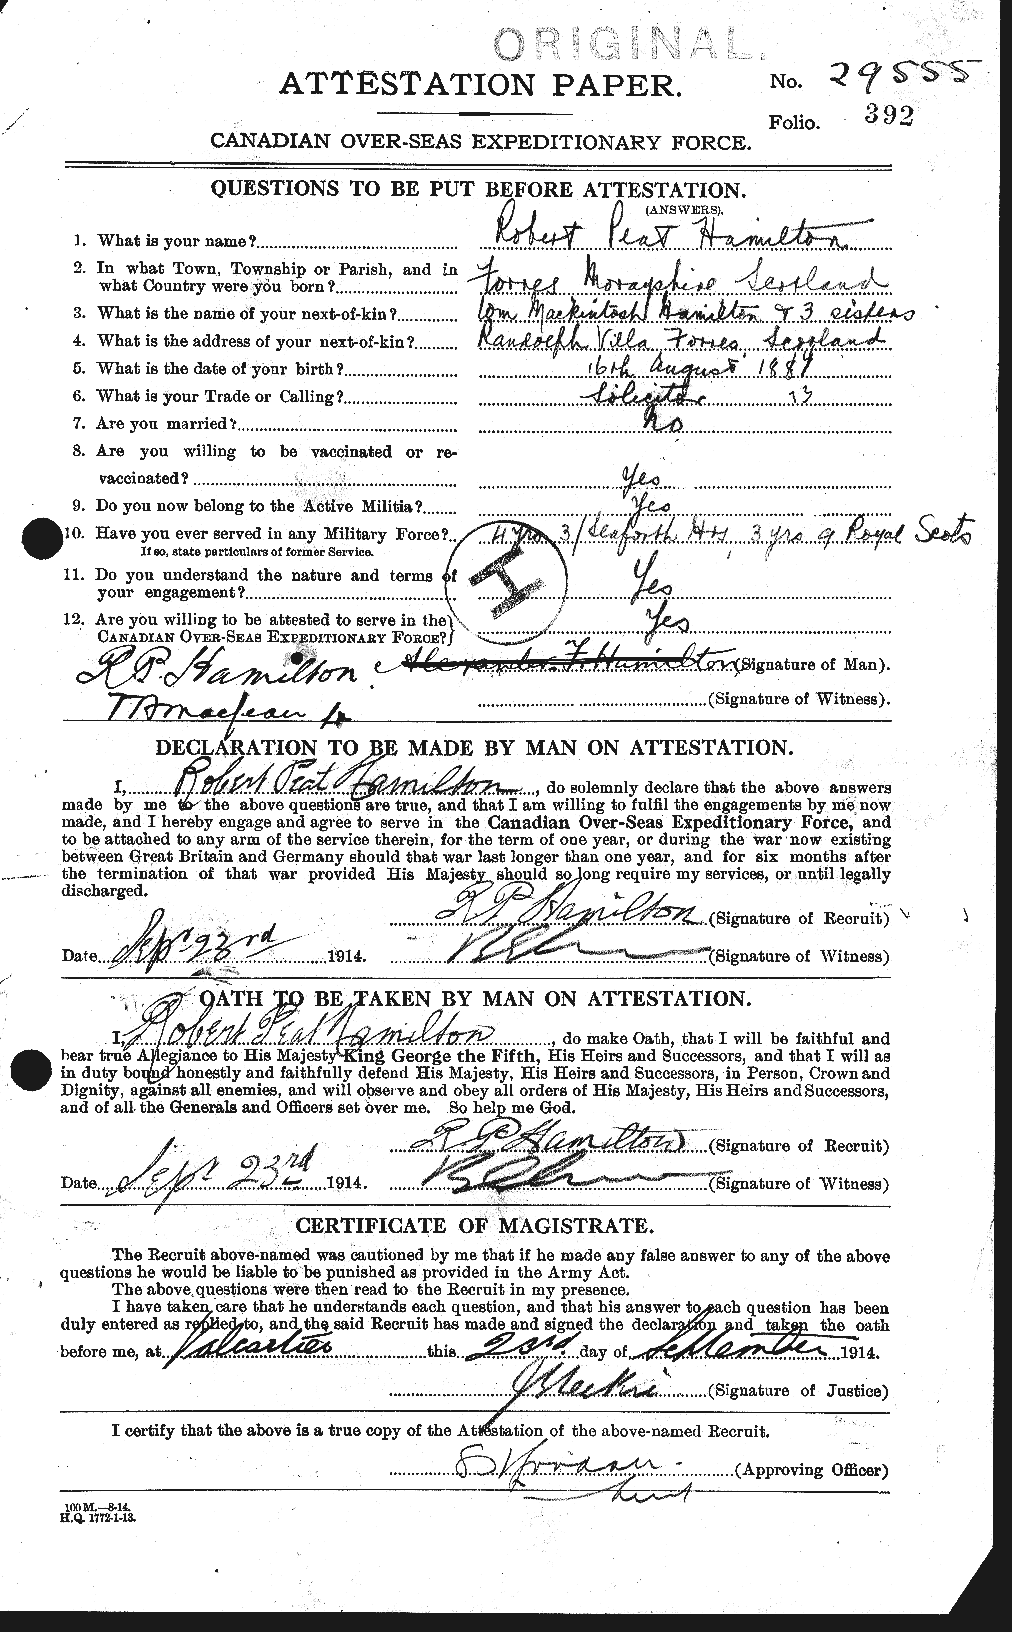 Personnel Records of the First World War - CEF 373269a